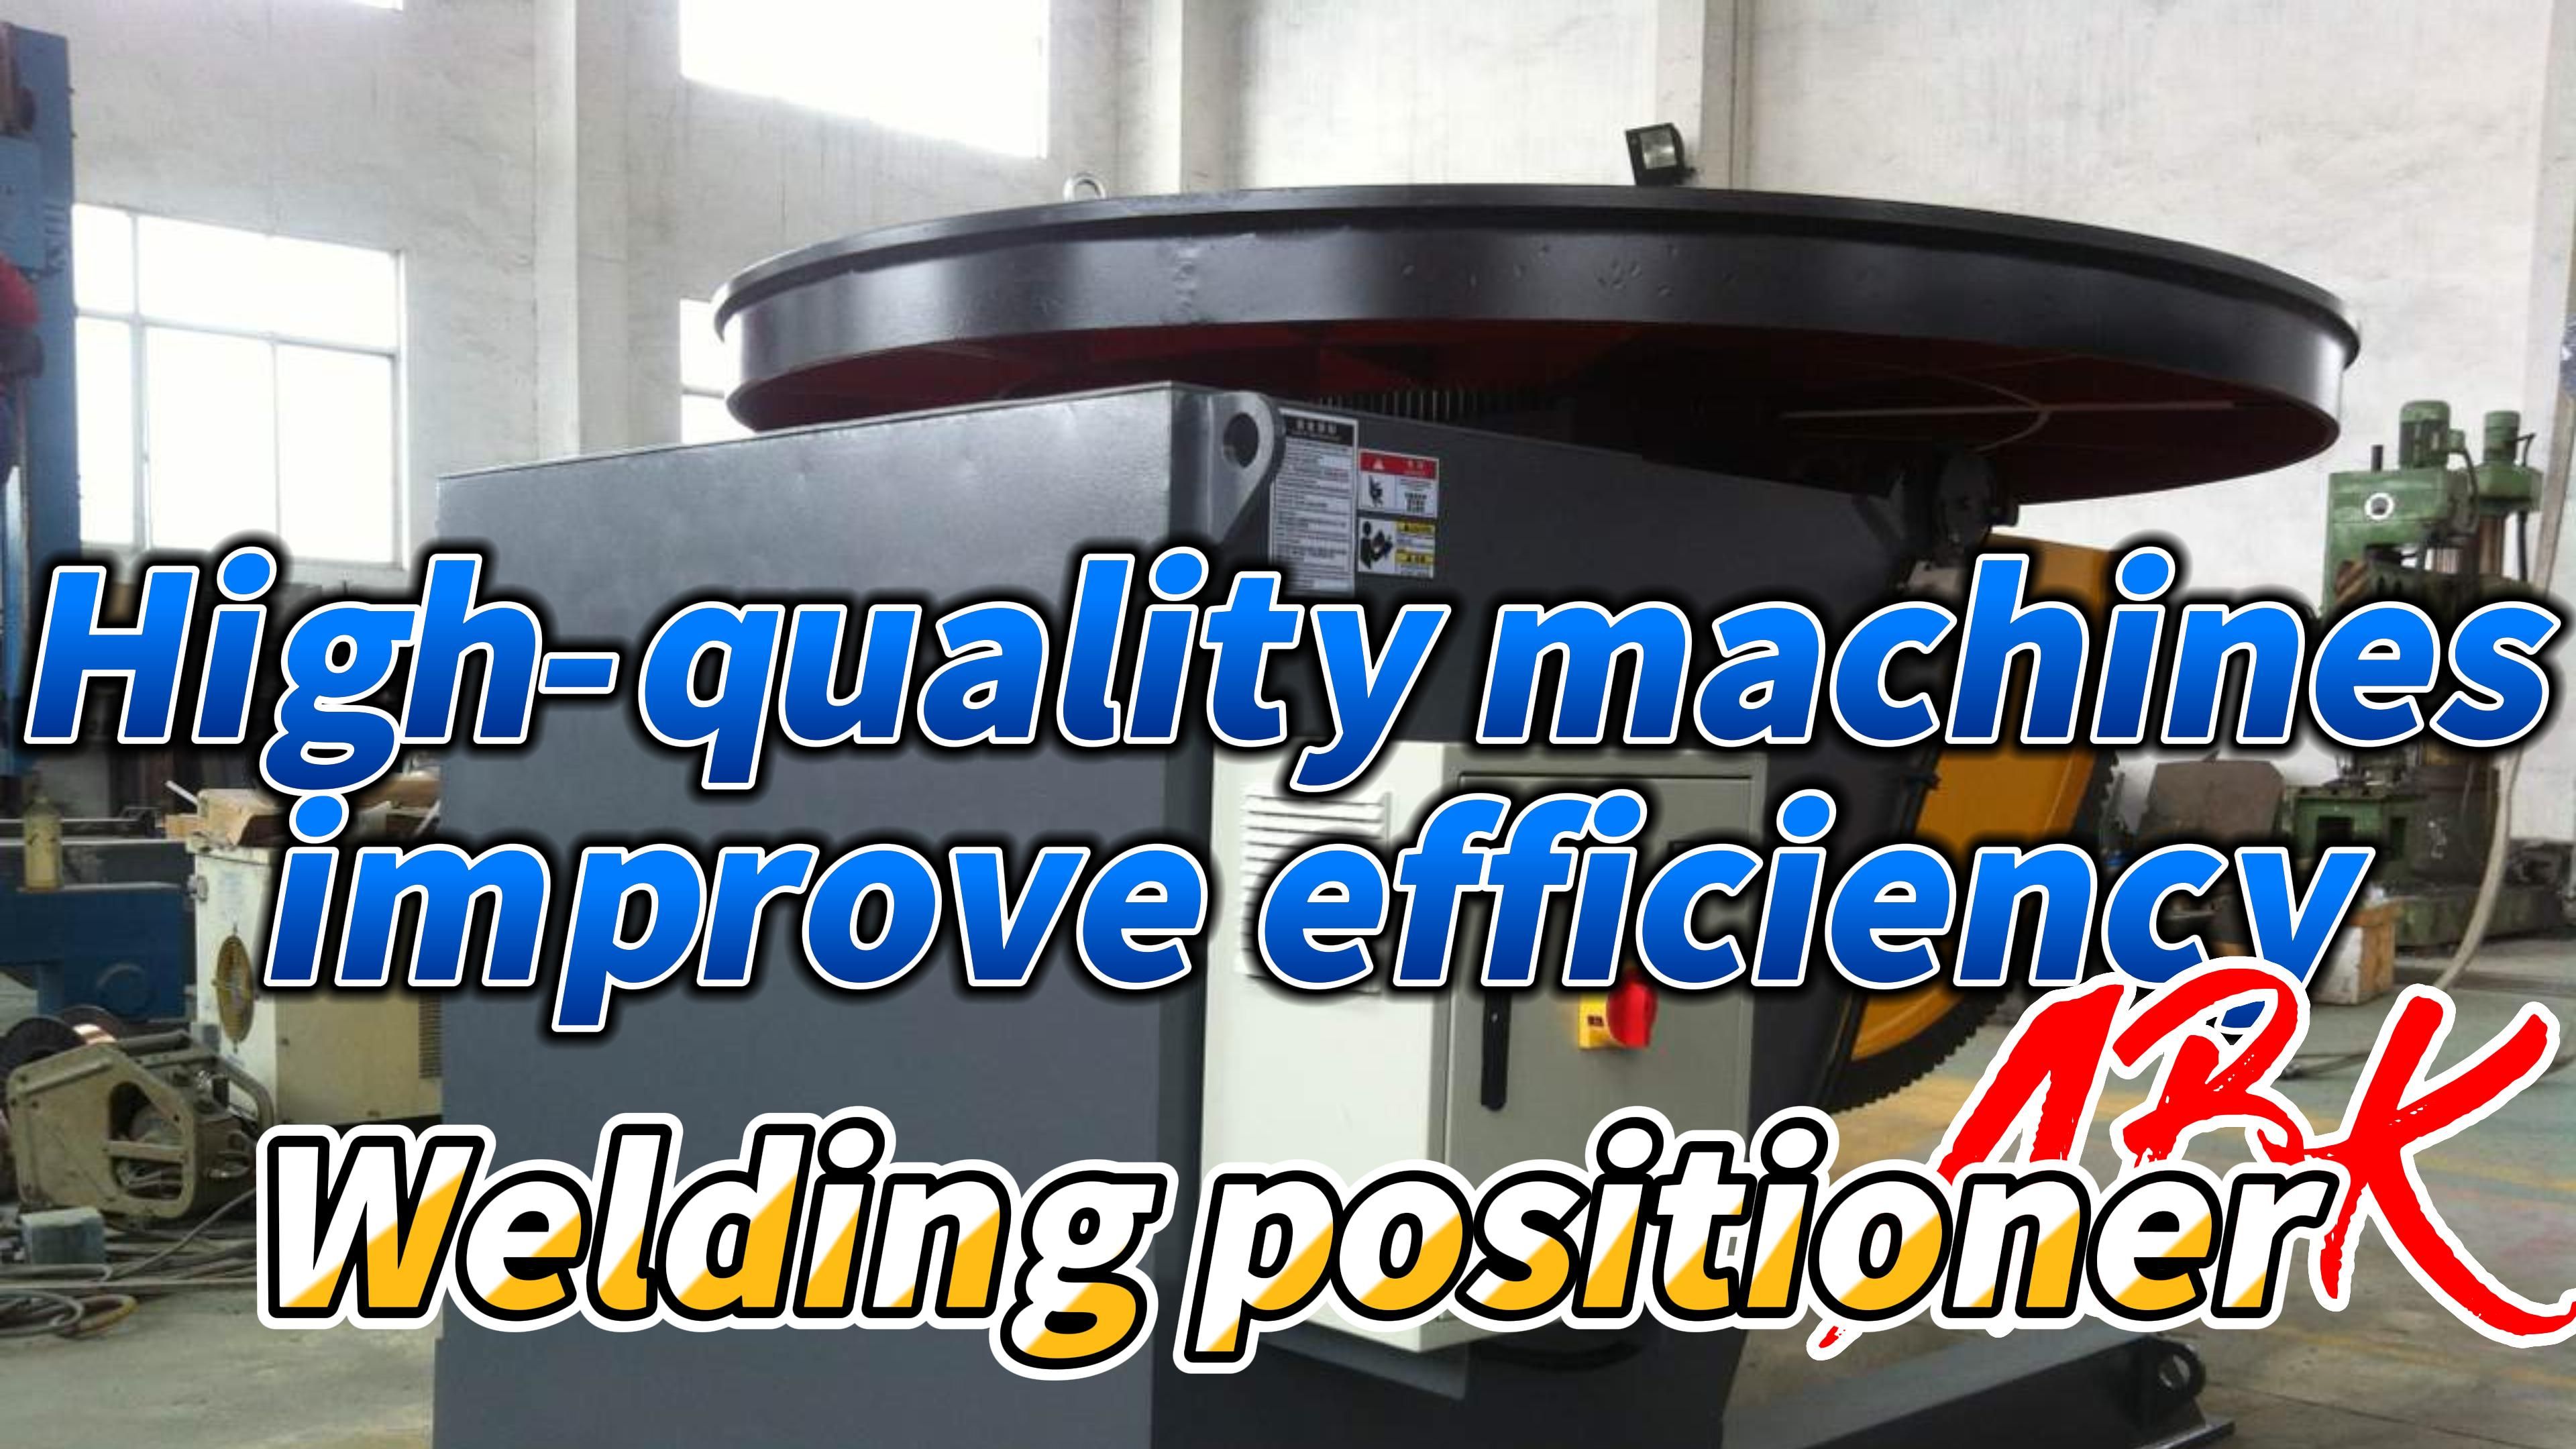 Welding Positioner: A Necessary Tool to Help Manufacturing Industry to Effectively Produce and Improve Quality